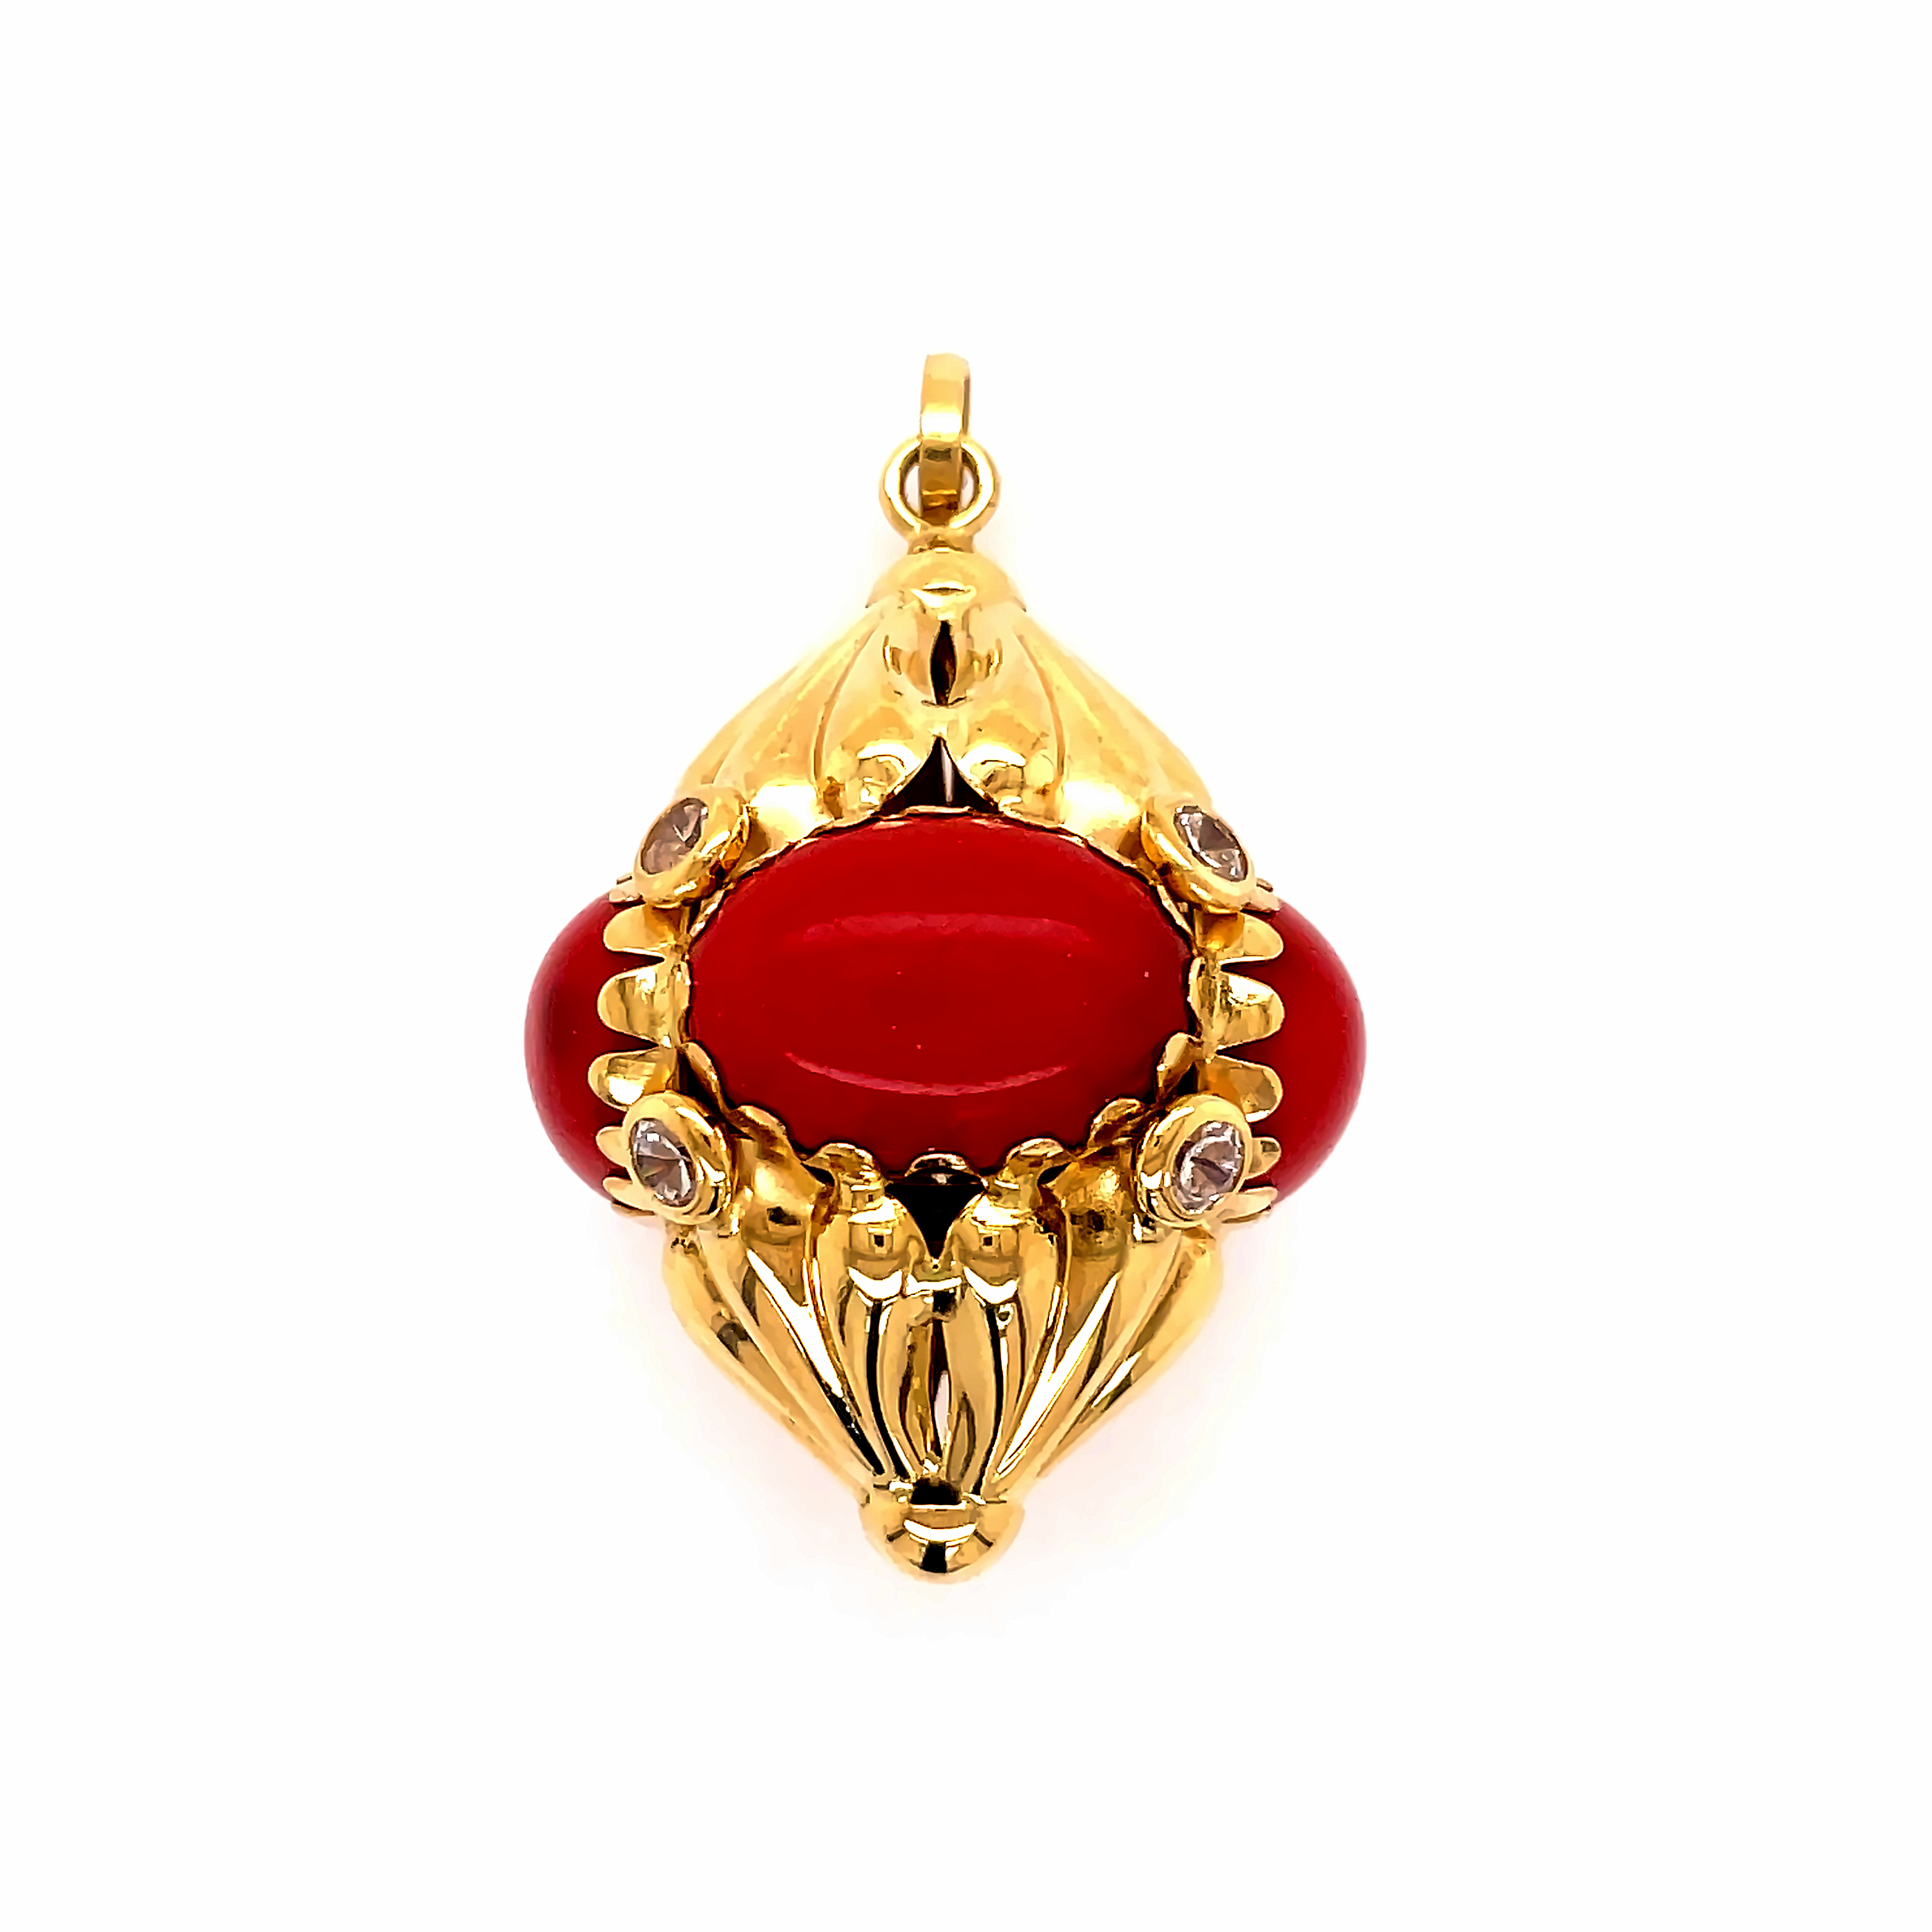 Solid 18k yellow gold  Great condition  Light wear  Red resin  8 Round diamonds 